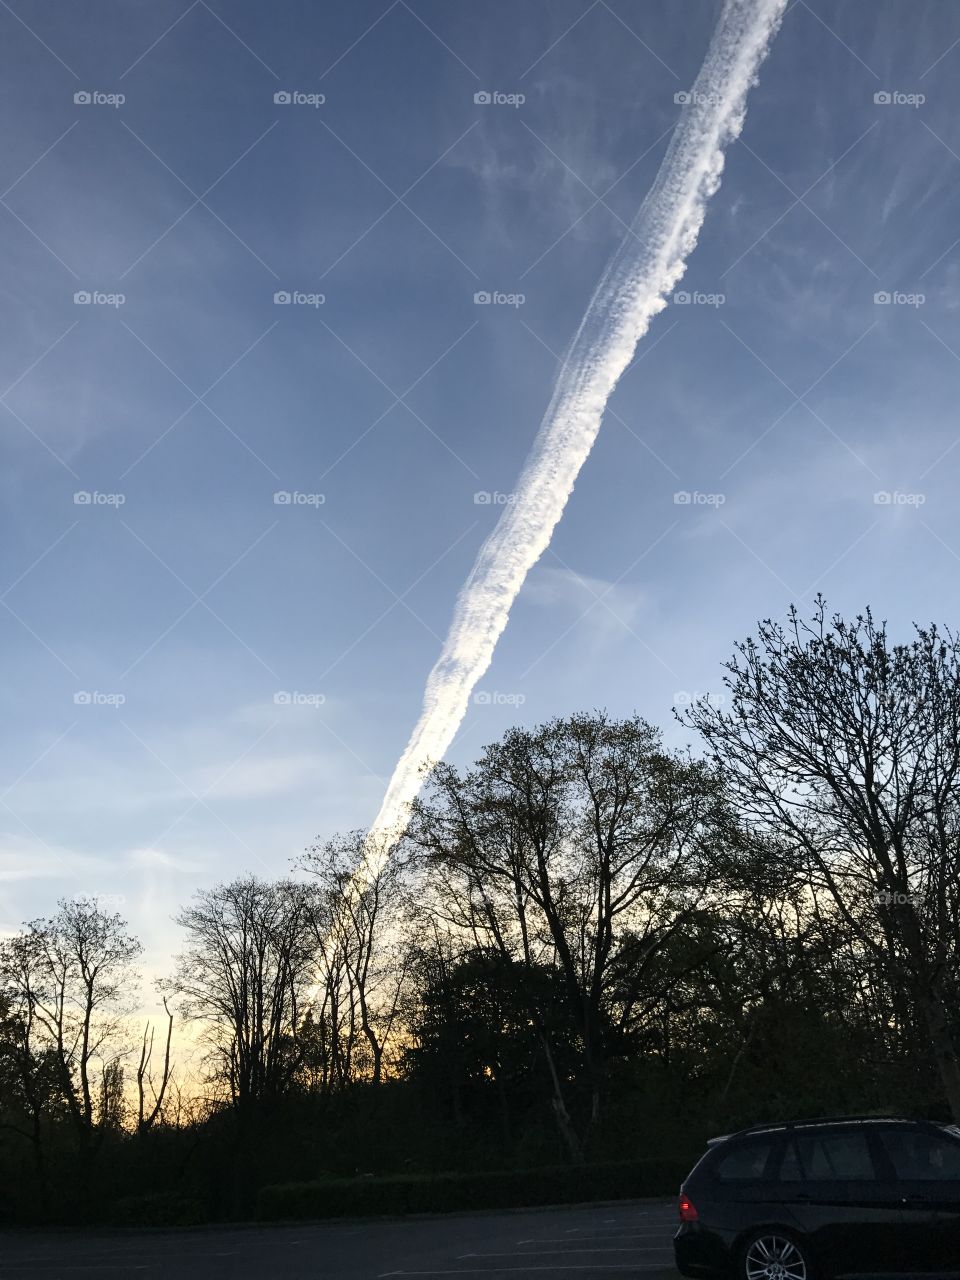 sky with airplane trails in the clouds 